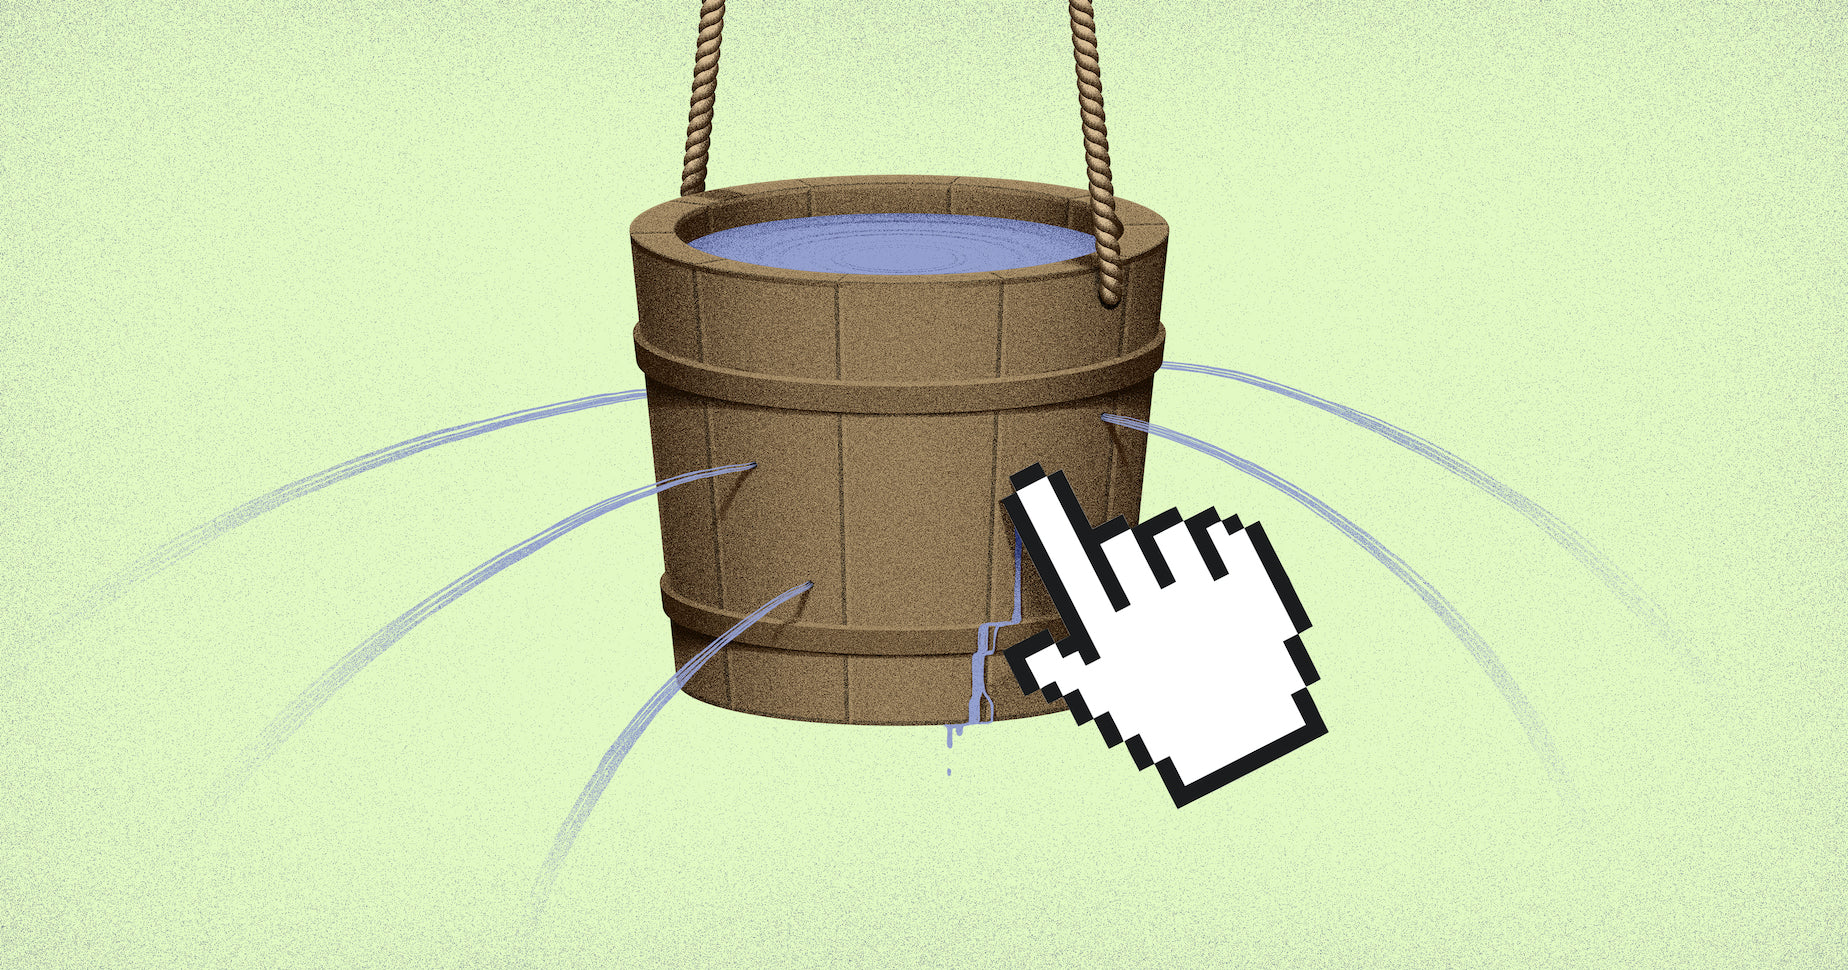 Illustration of a mouse pointer plugging a leaky funnel, represented by a bucket